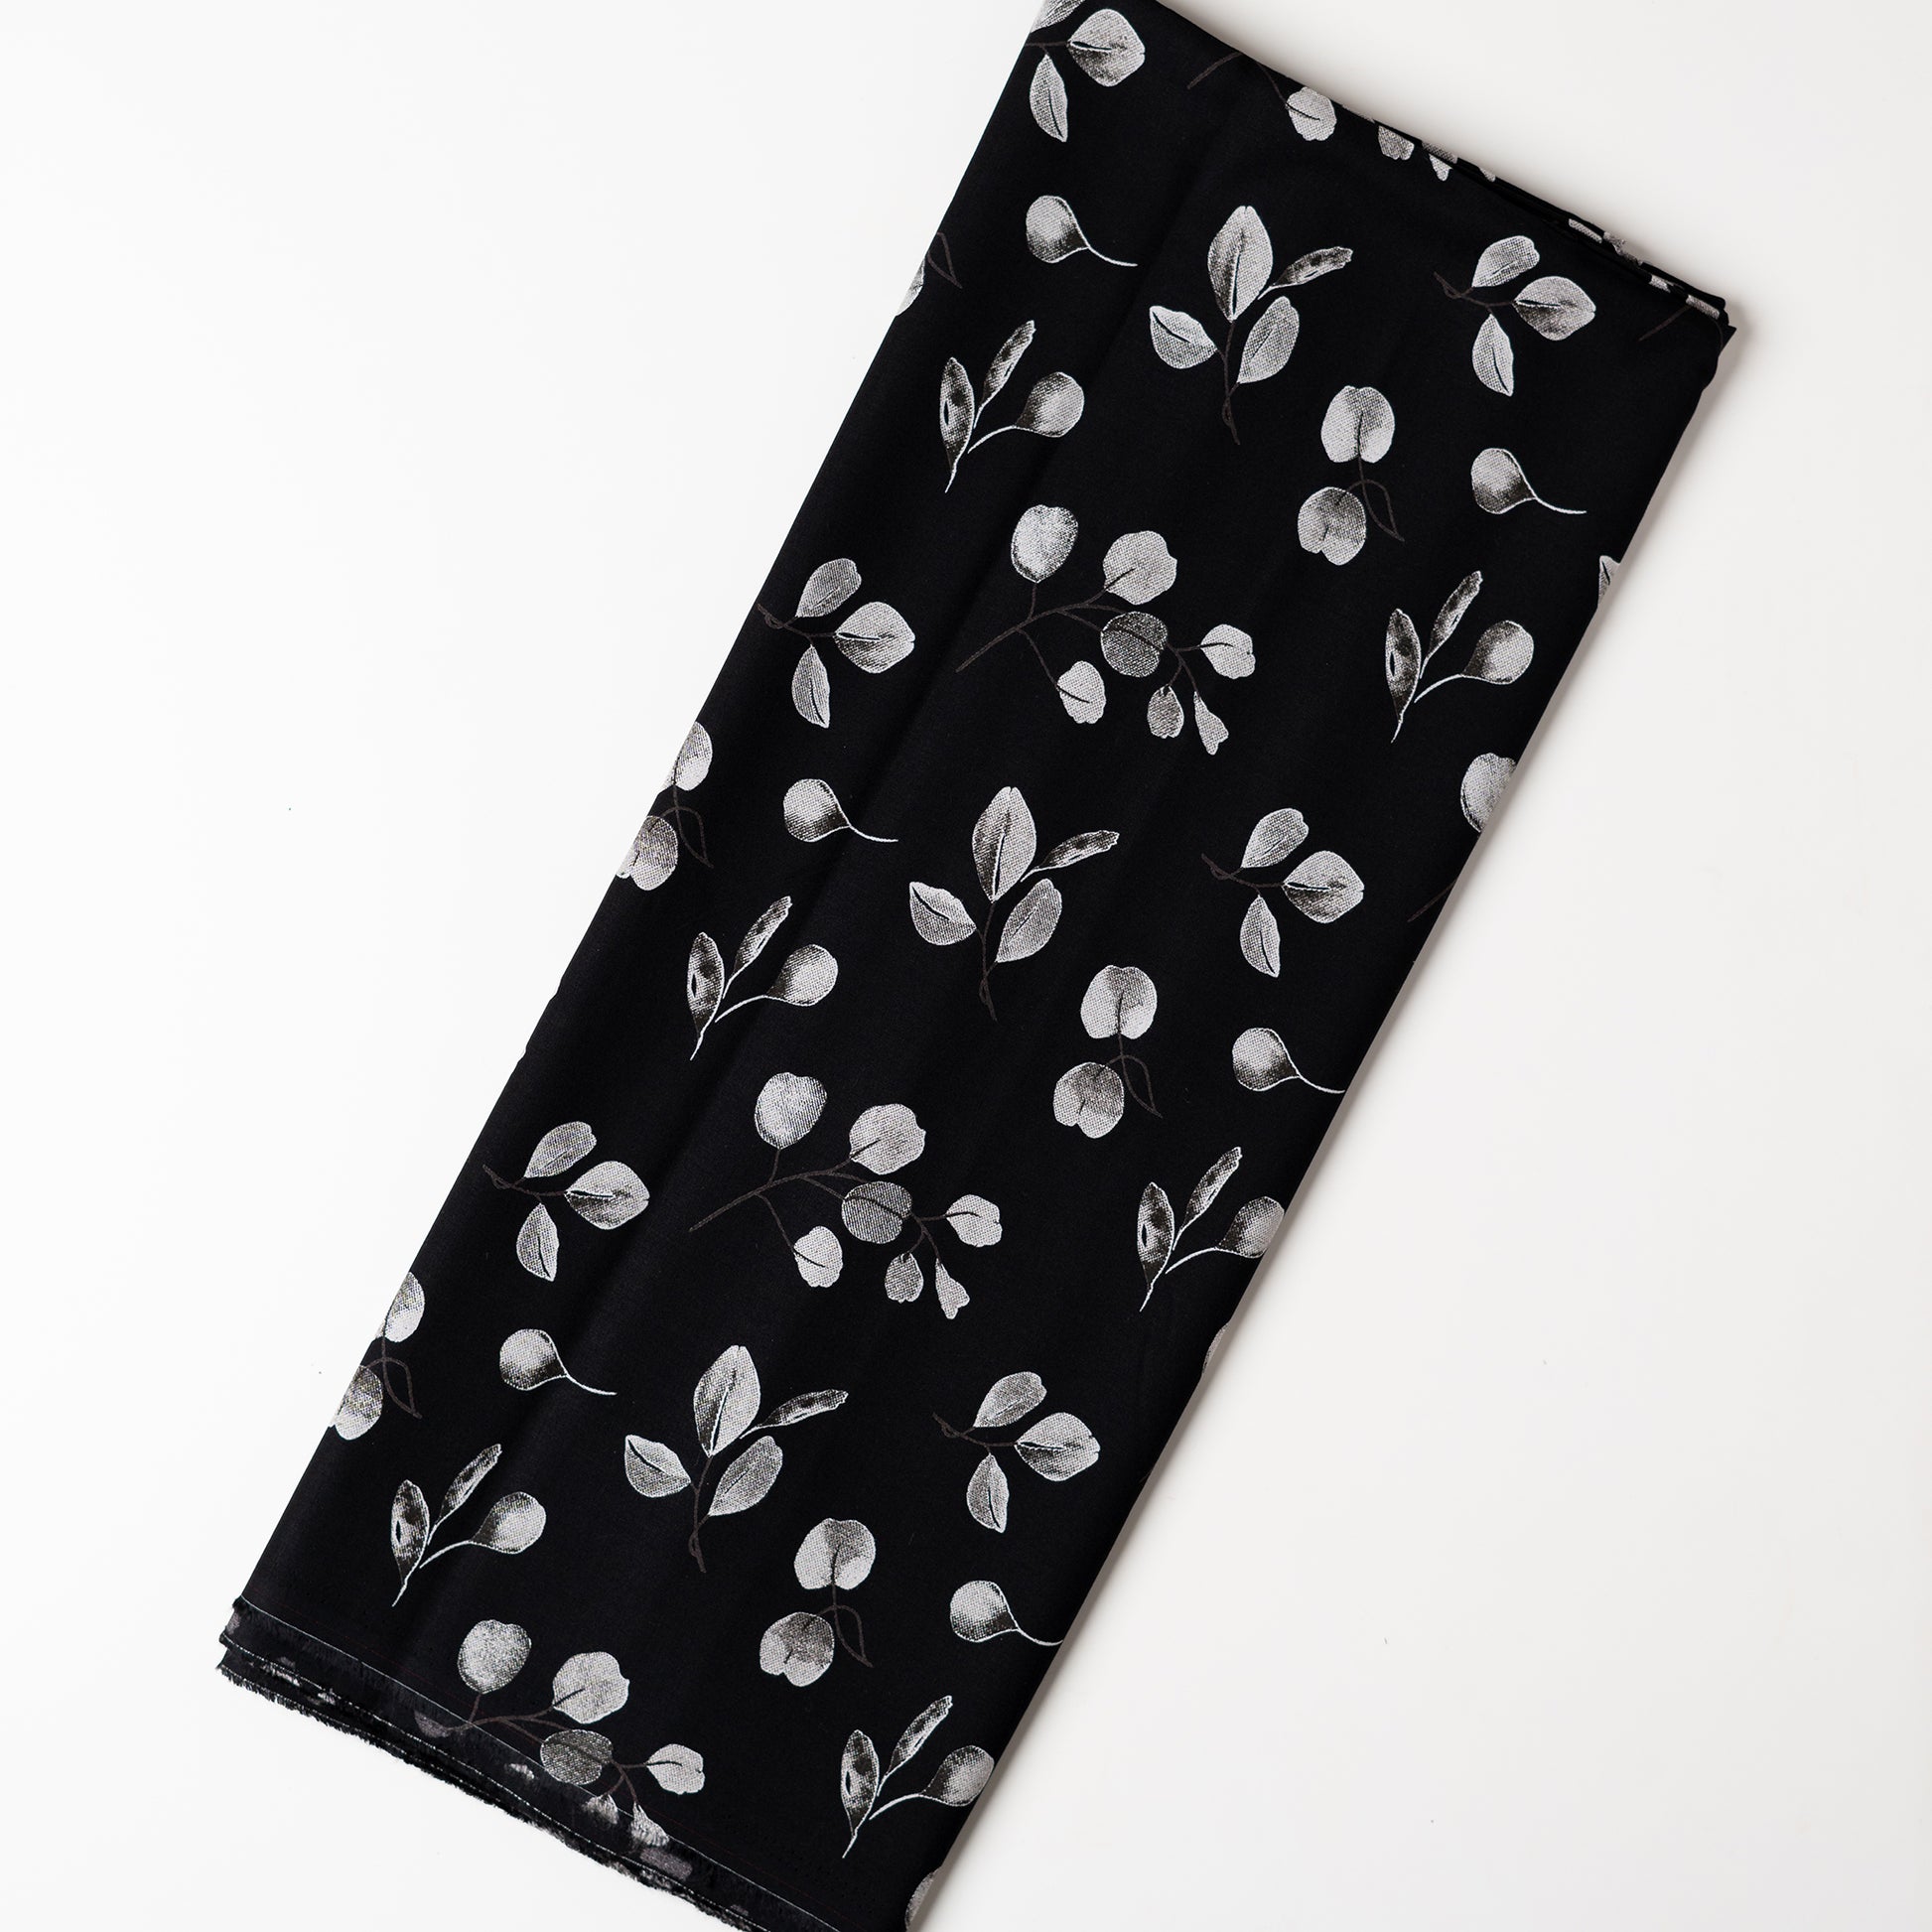 Rayon black color fabric with grey and white color mix prints, suitable for kurti/kurta, tops, or gowns. 